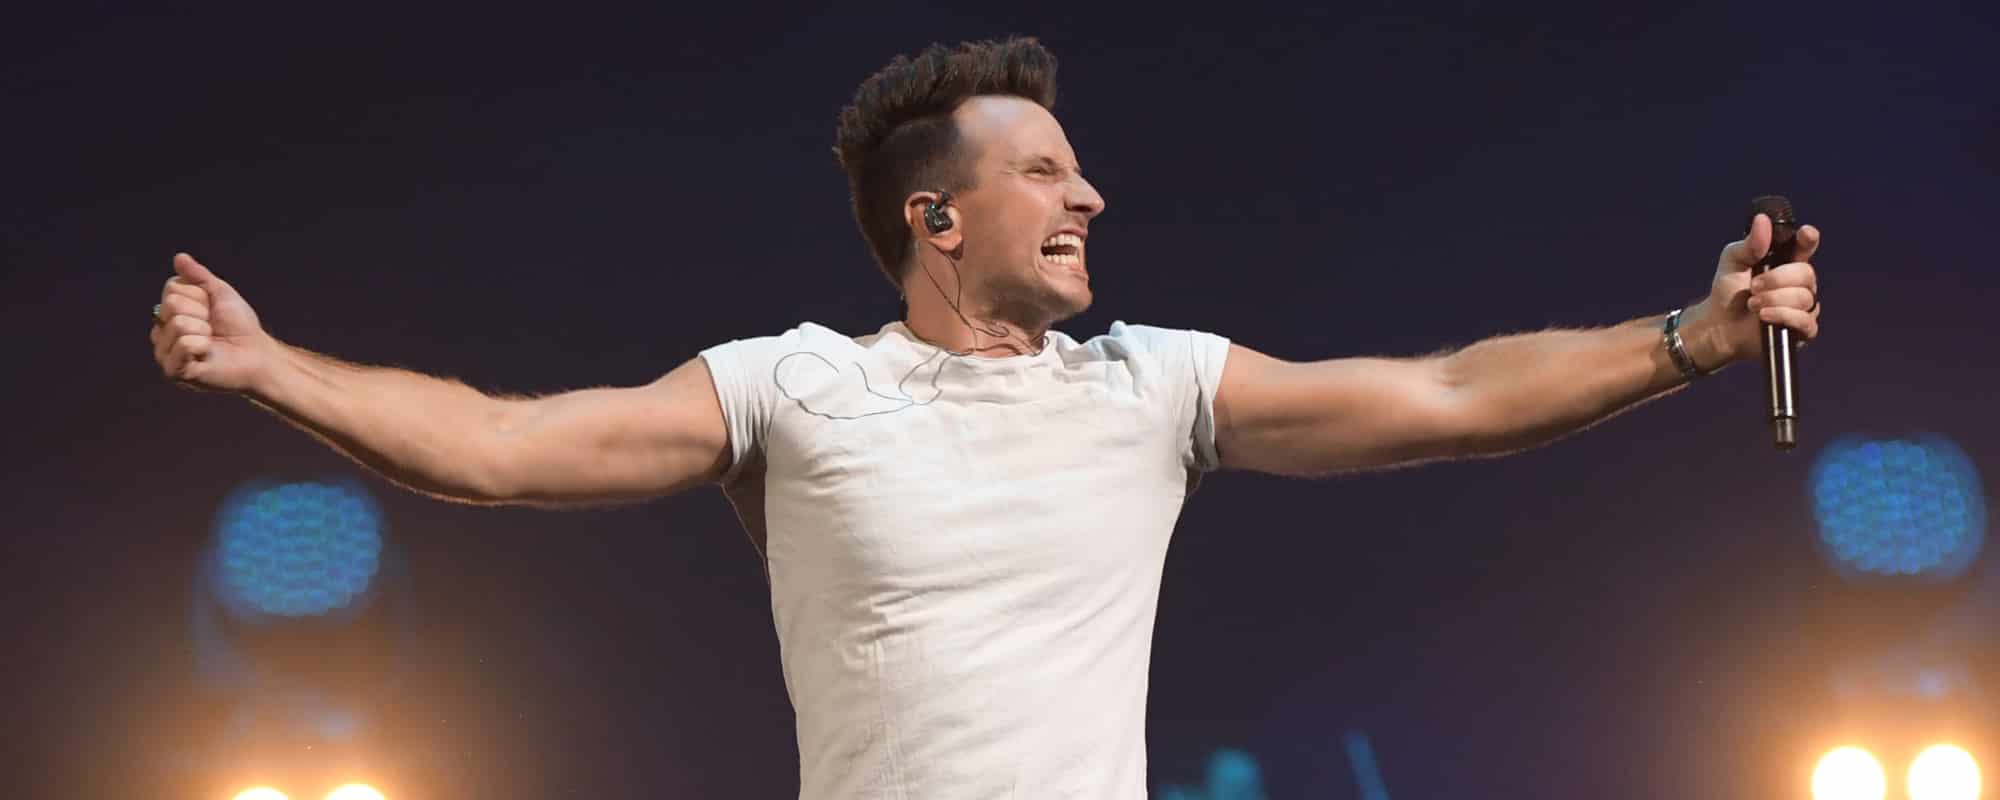 Russell Dickerson Discusses Wrapping His Whirlwind 2020 With ‘Southern Symphony’